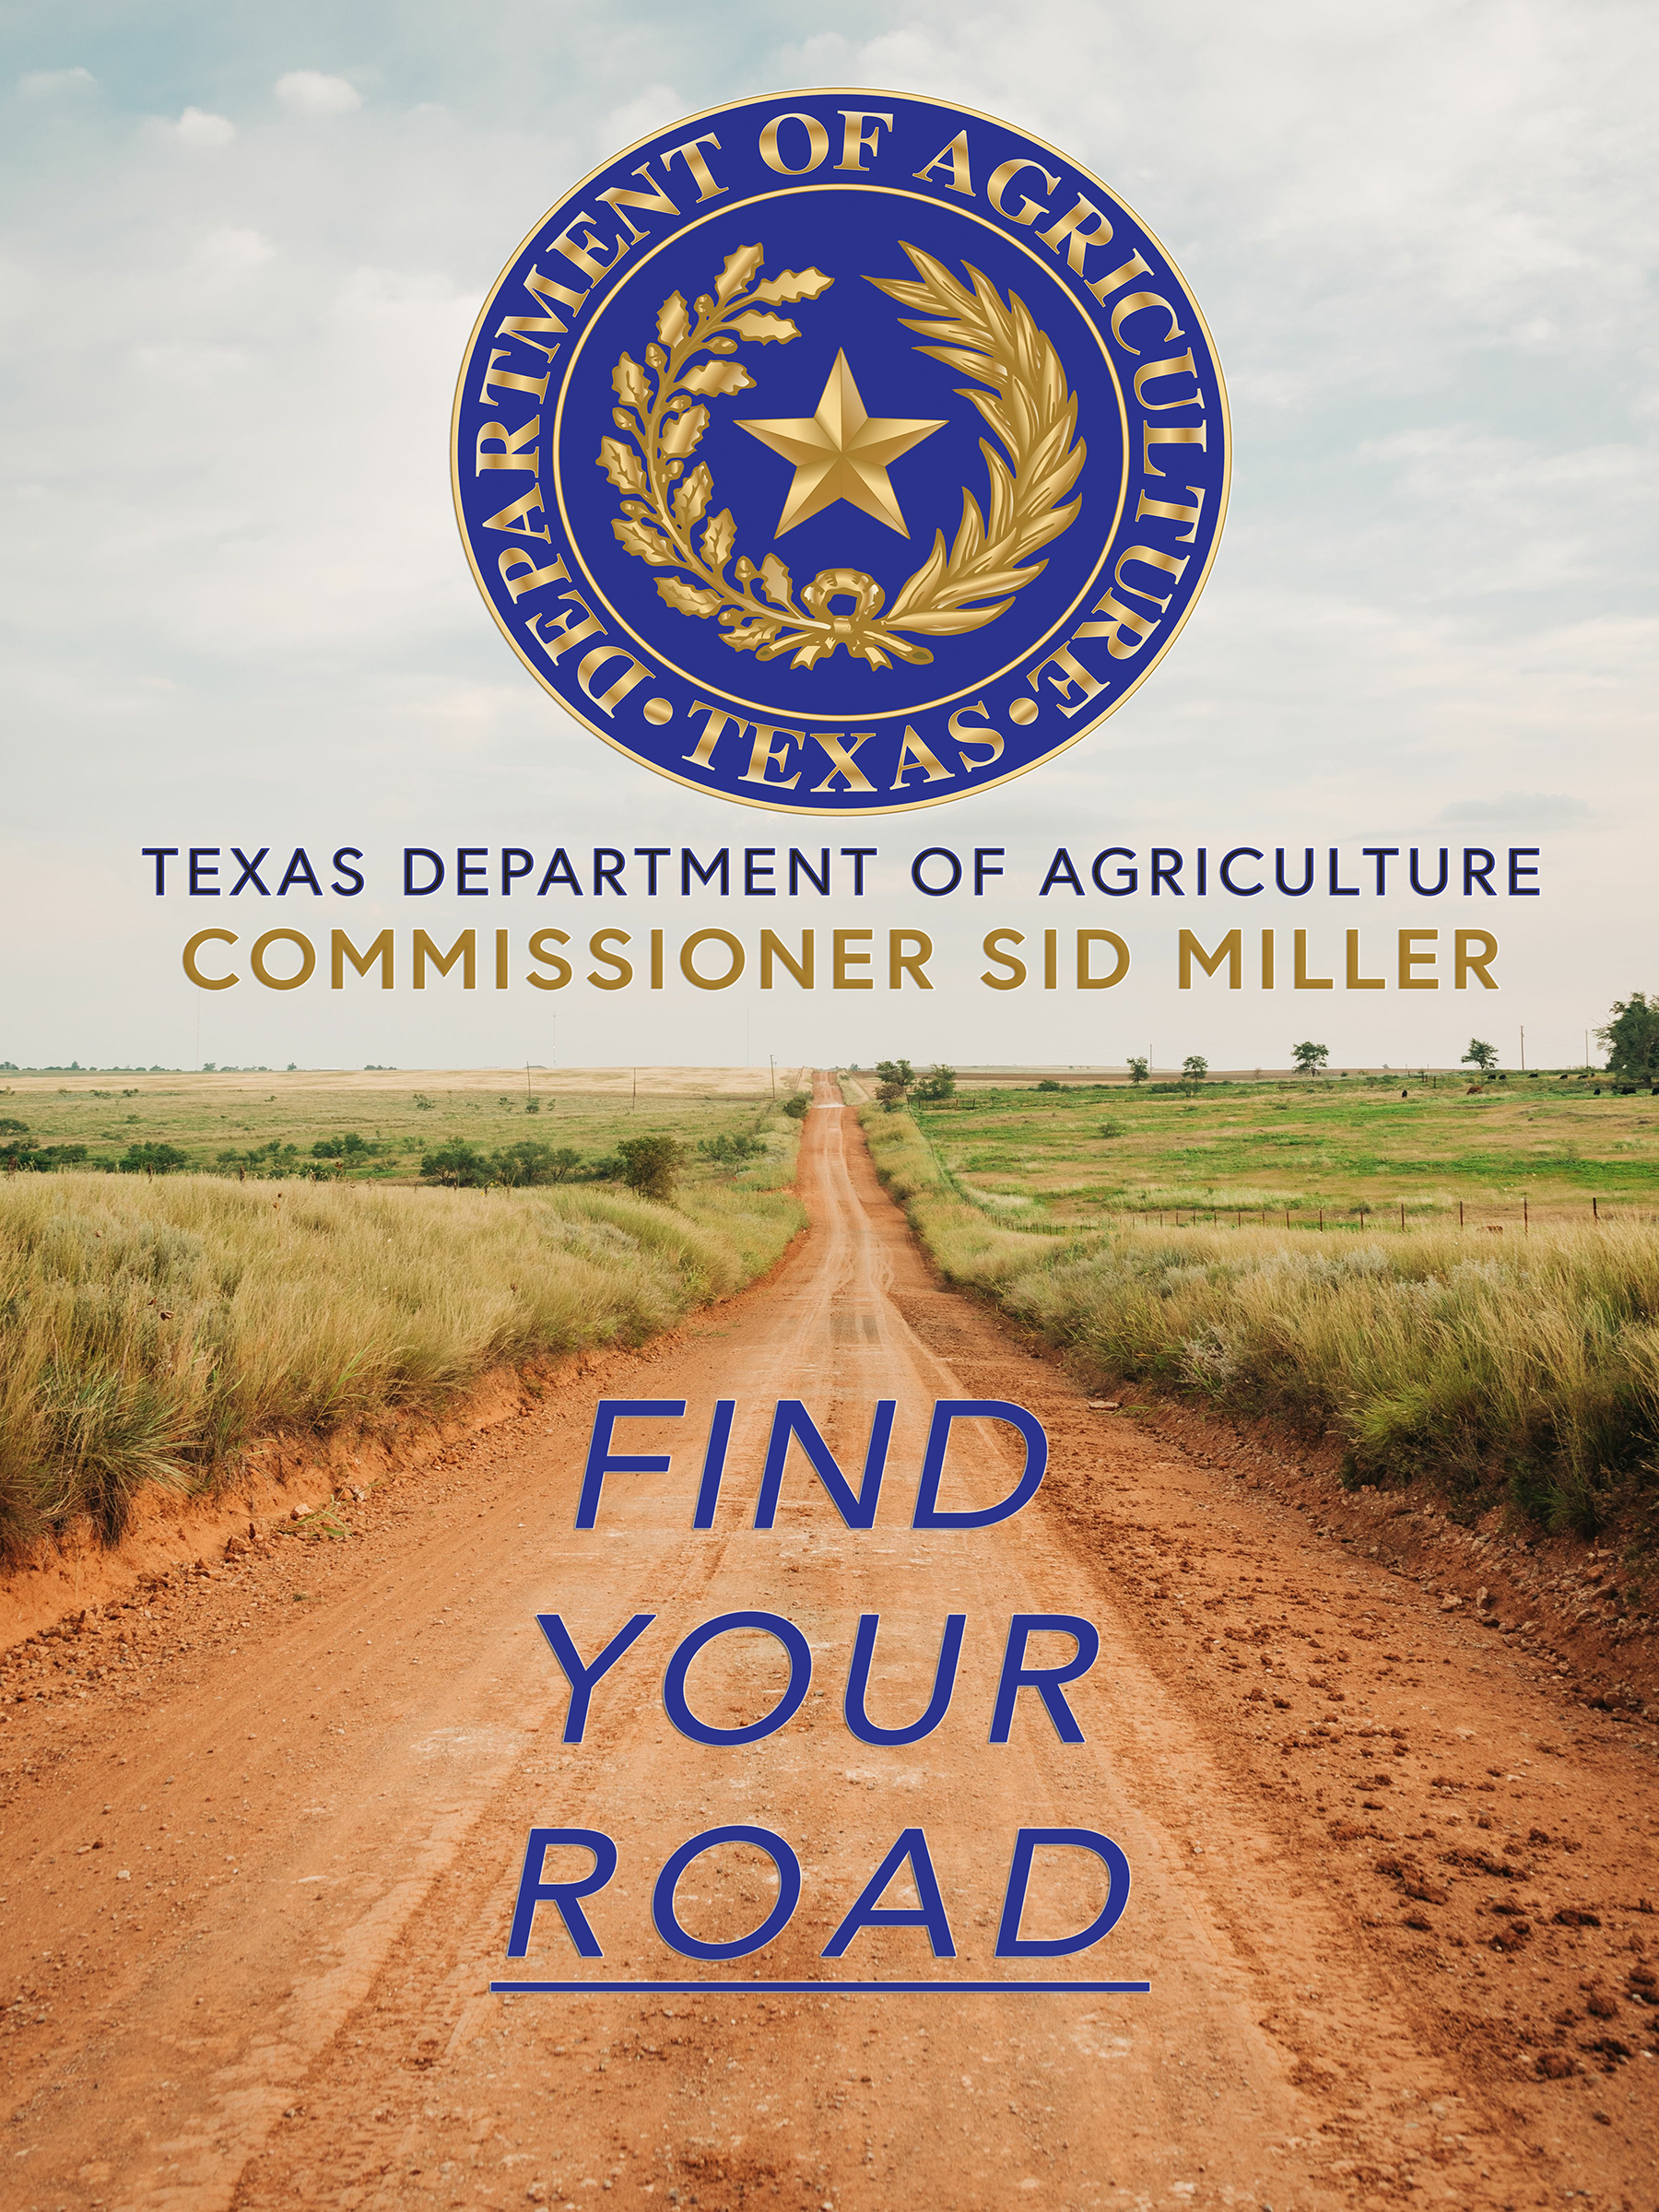 Find Your Road With a Job at TDA. Description: a red dirt country road runs through rolling agricultural fields toward the horizon.